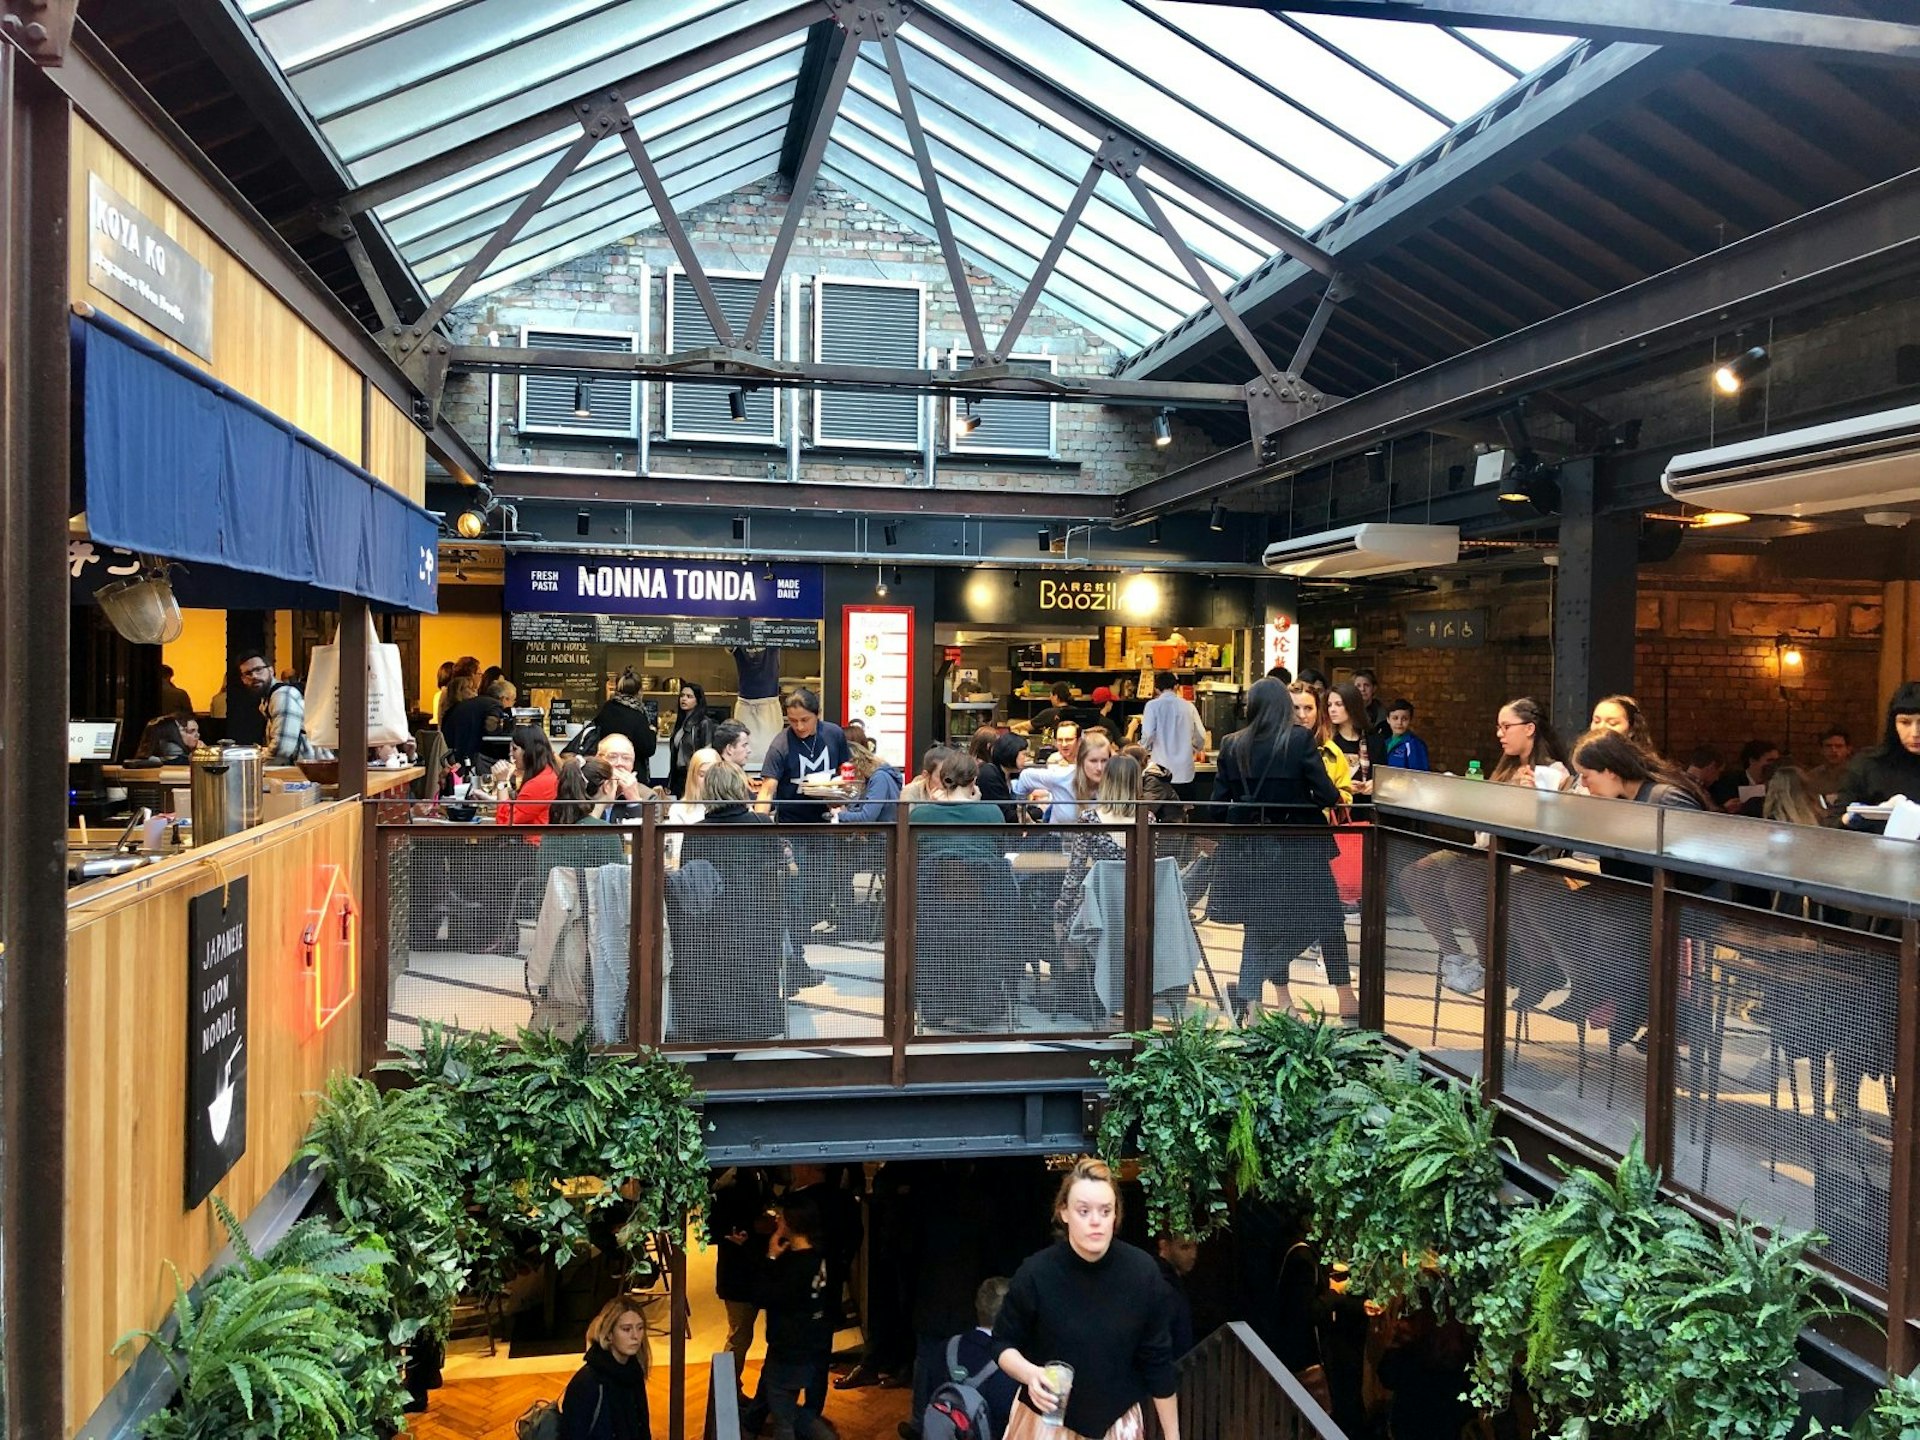 Several diners sit at tables below a glass roof in Victoria's Market Hall